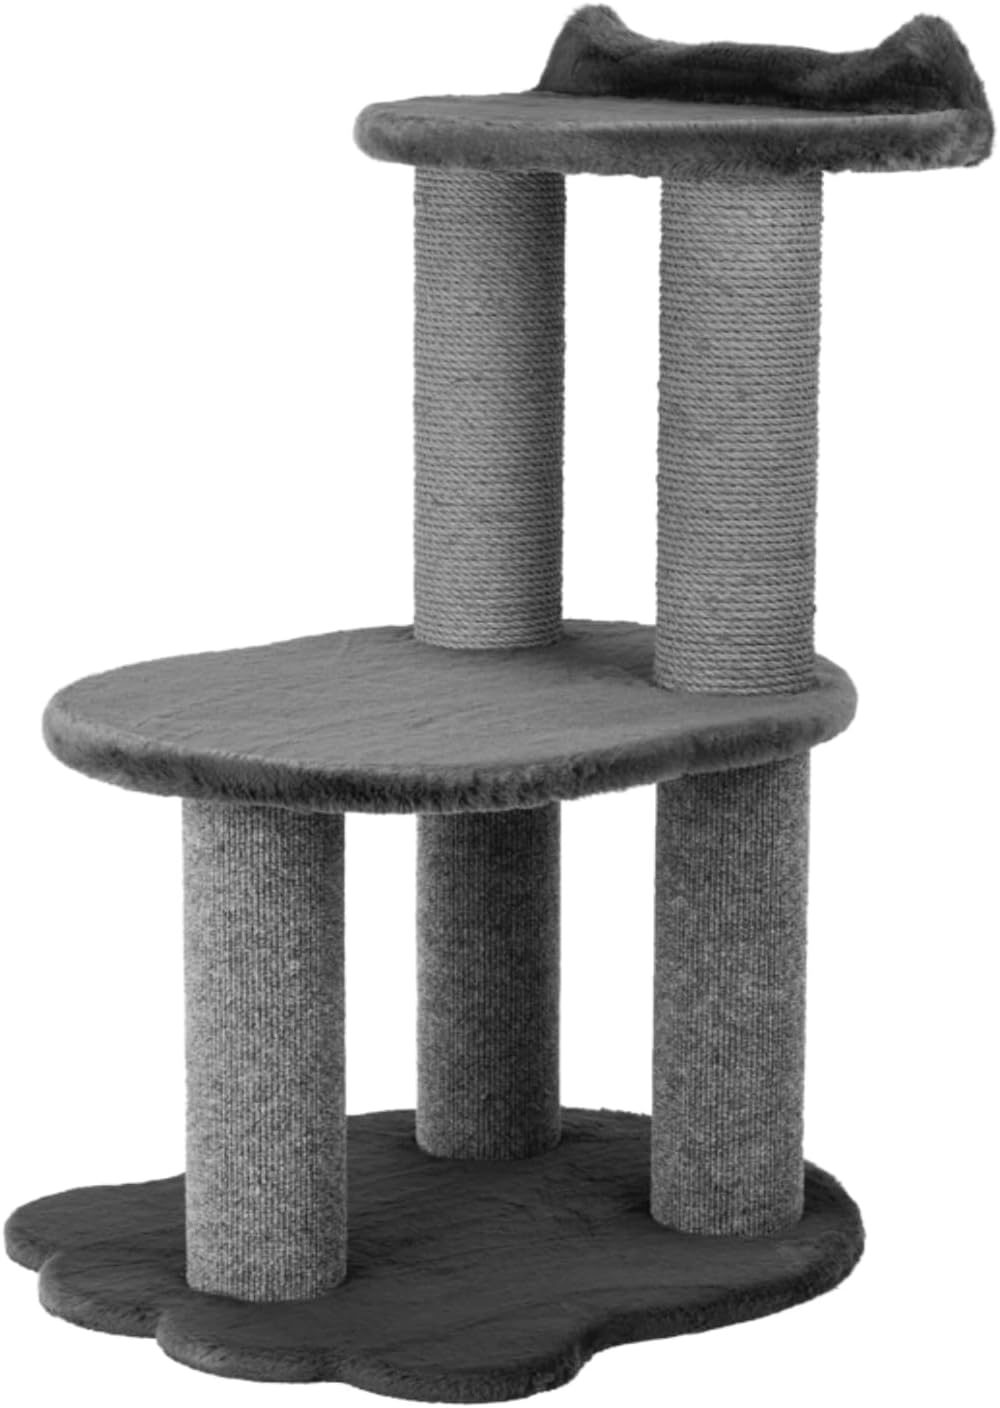 34 Inch Classic Comfort for Indoor Modern Premium Cats and Kittens Scratching Tower Larger Base for Better Stability, (Furs: Grey, Rope: Grey)